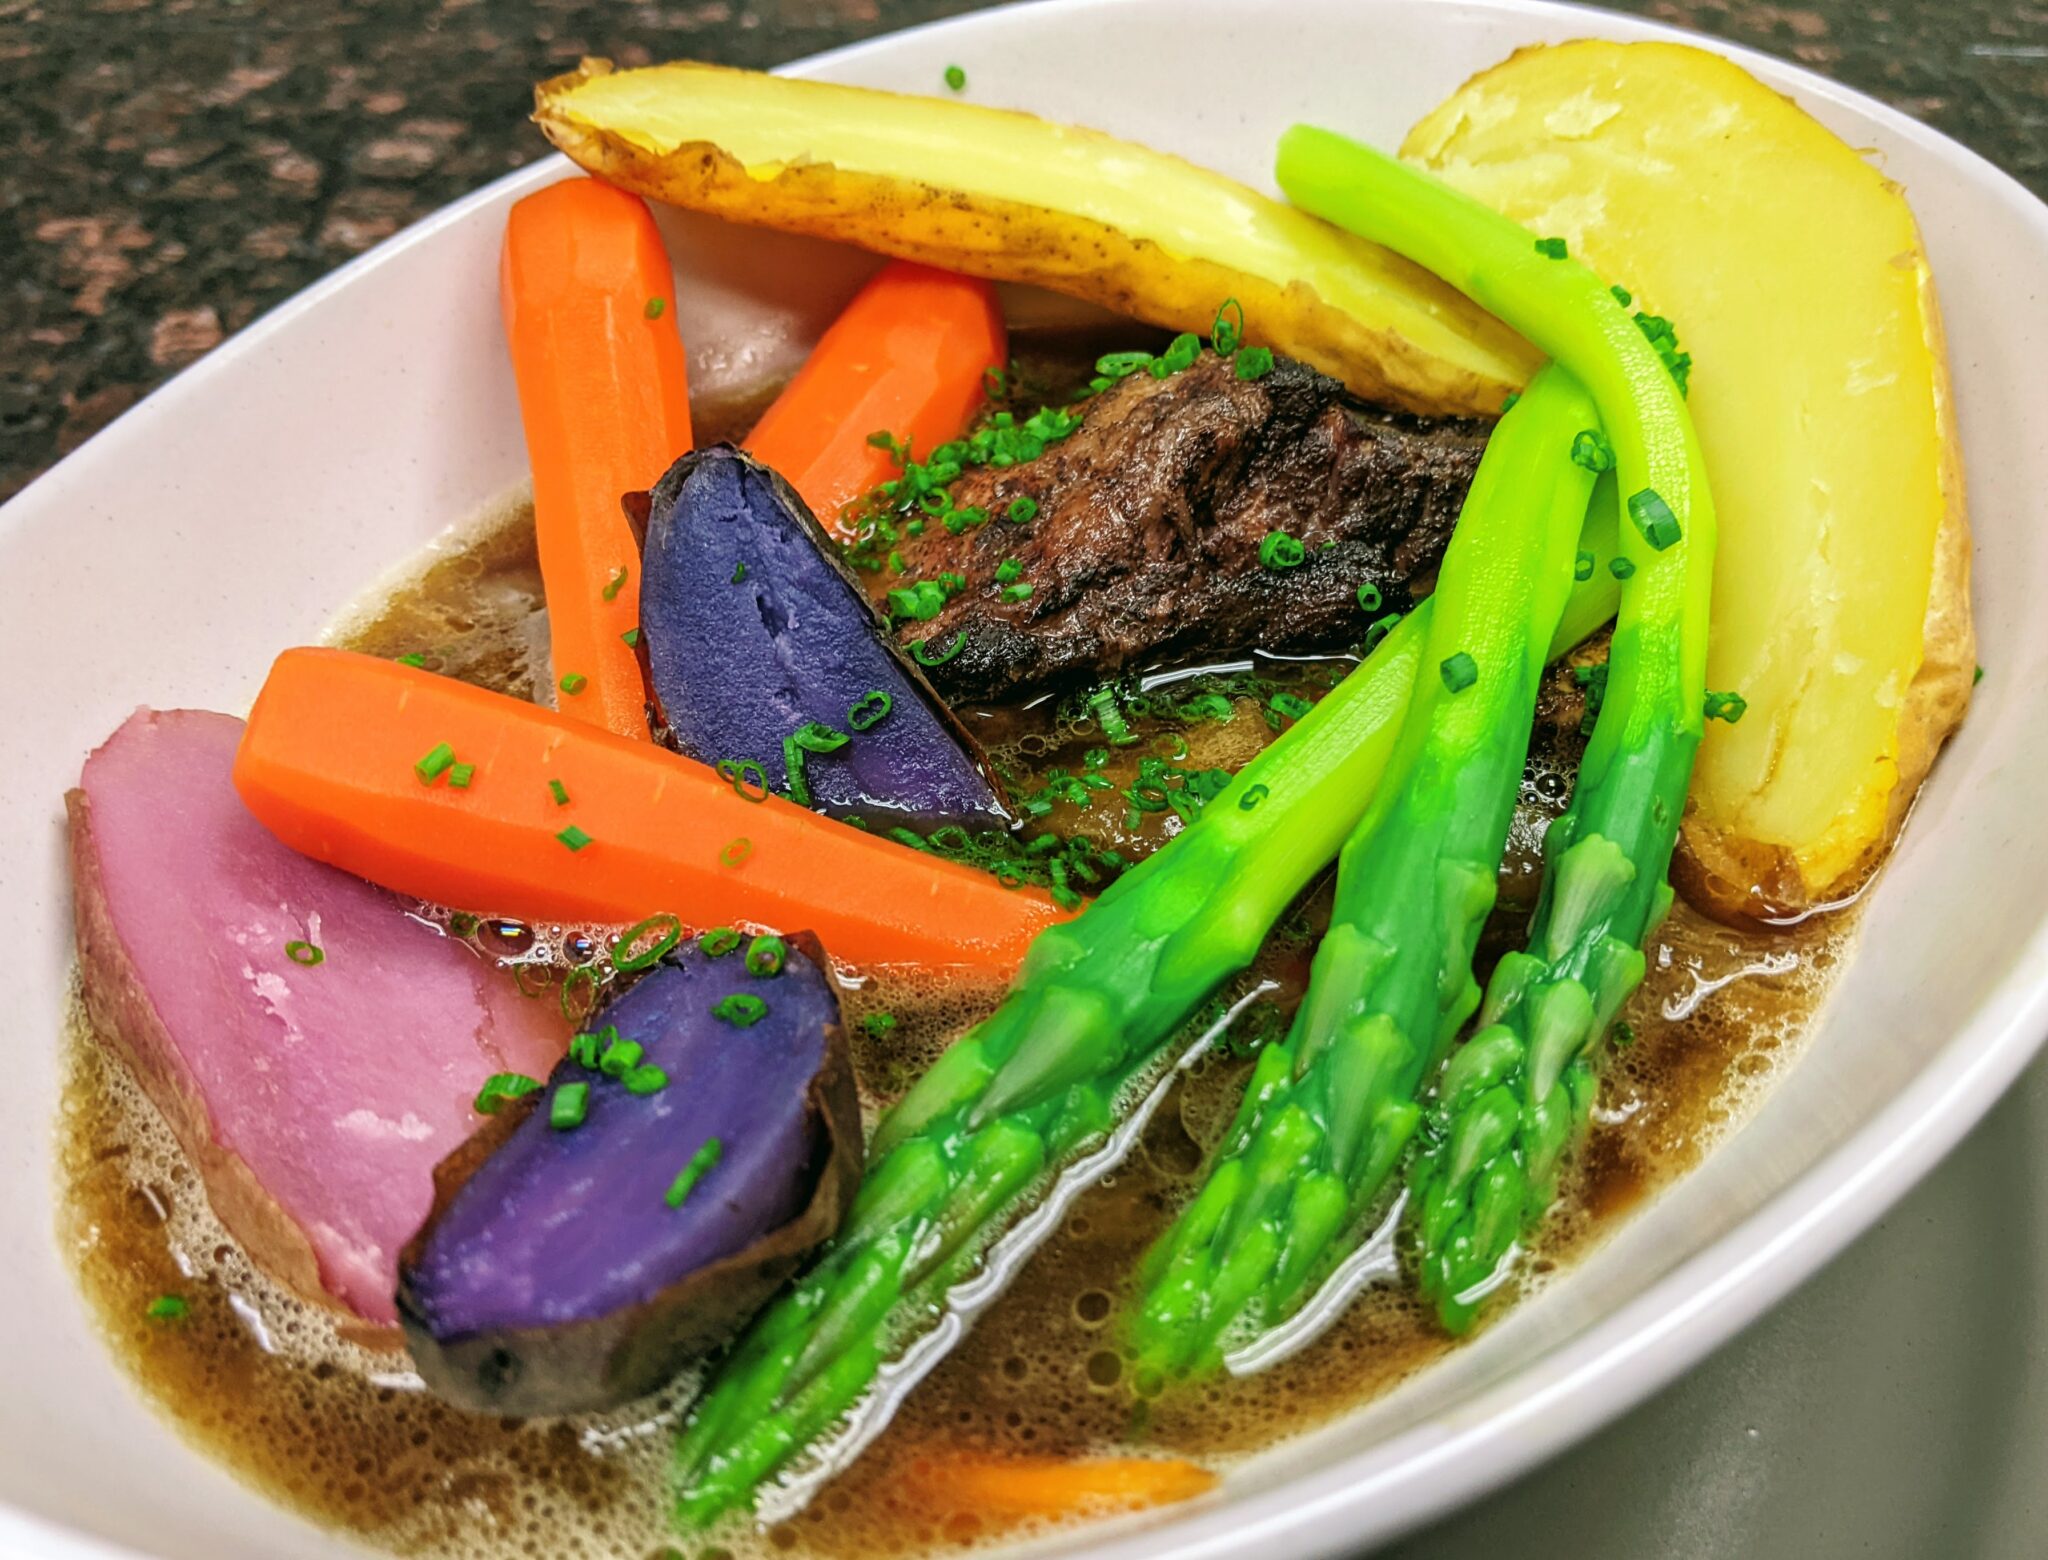 Pot-au-Feu: The Dish That Made Boiled Beef a French Classic